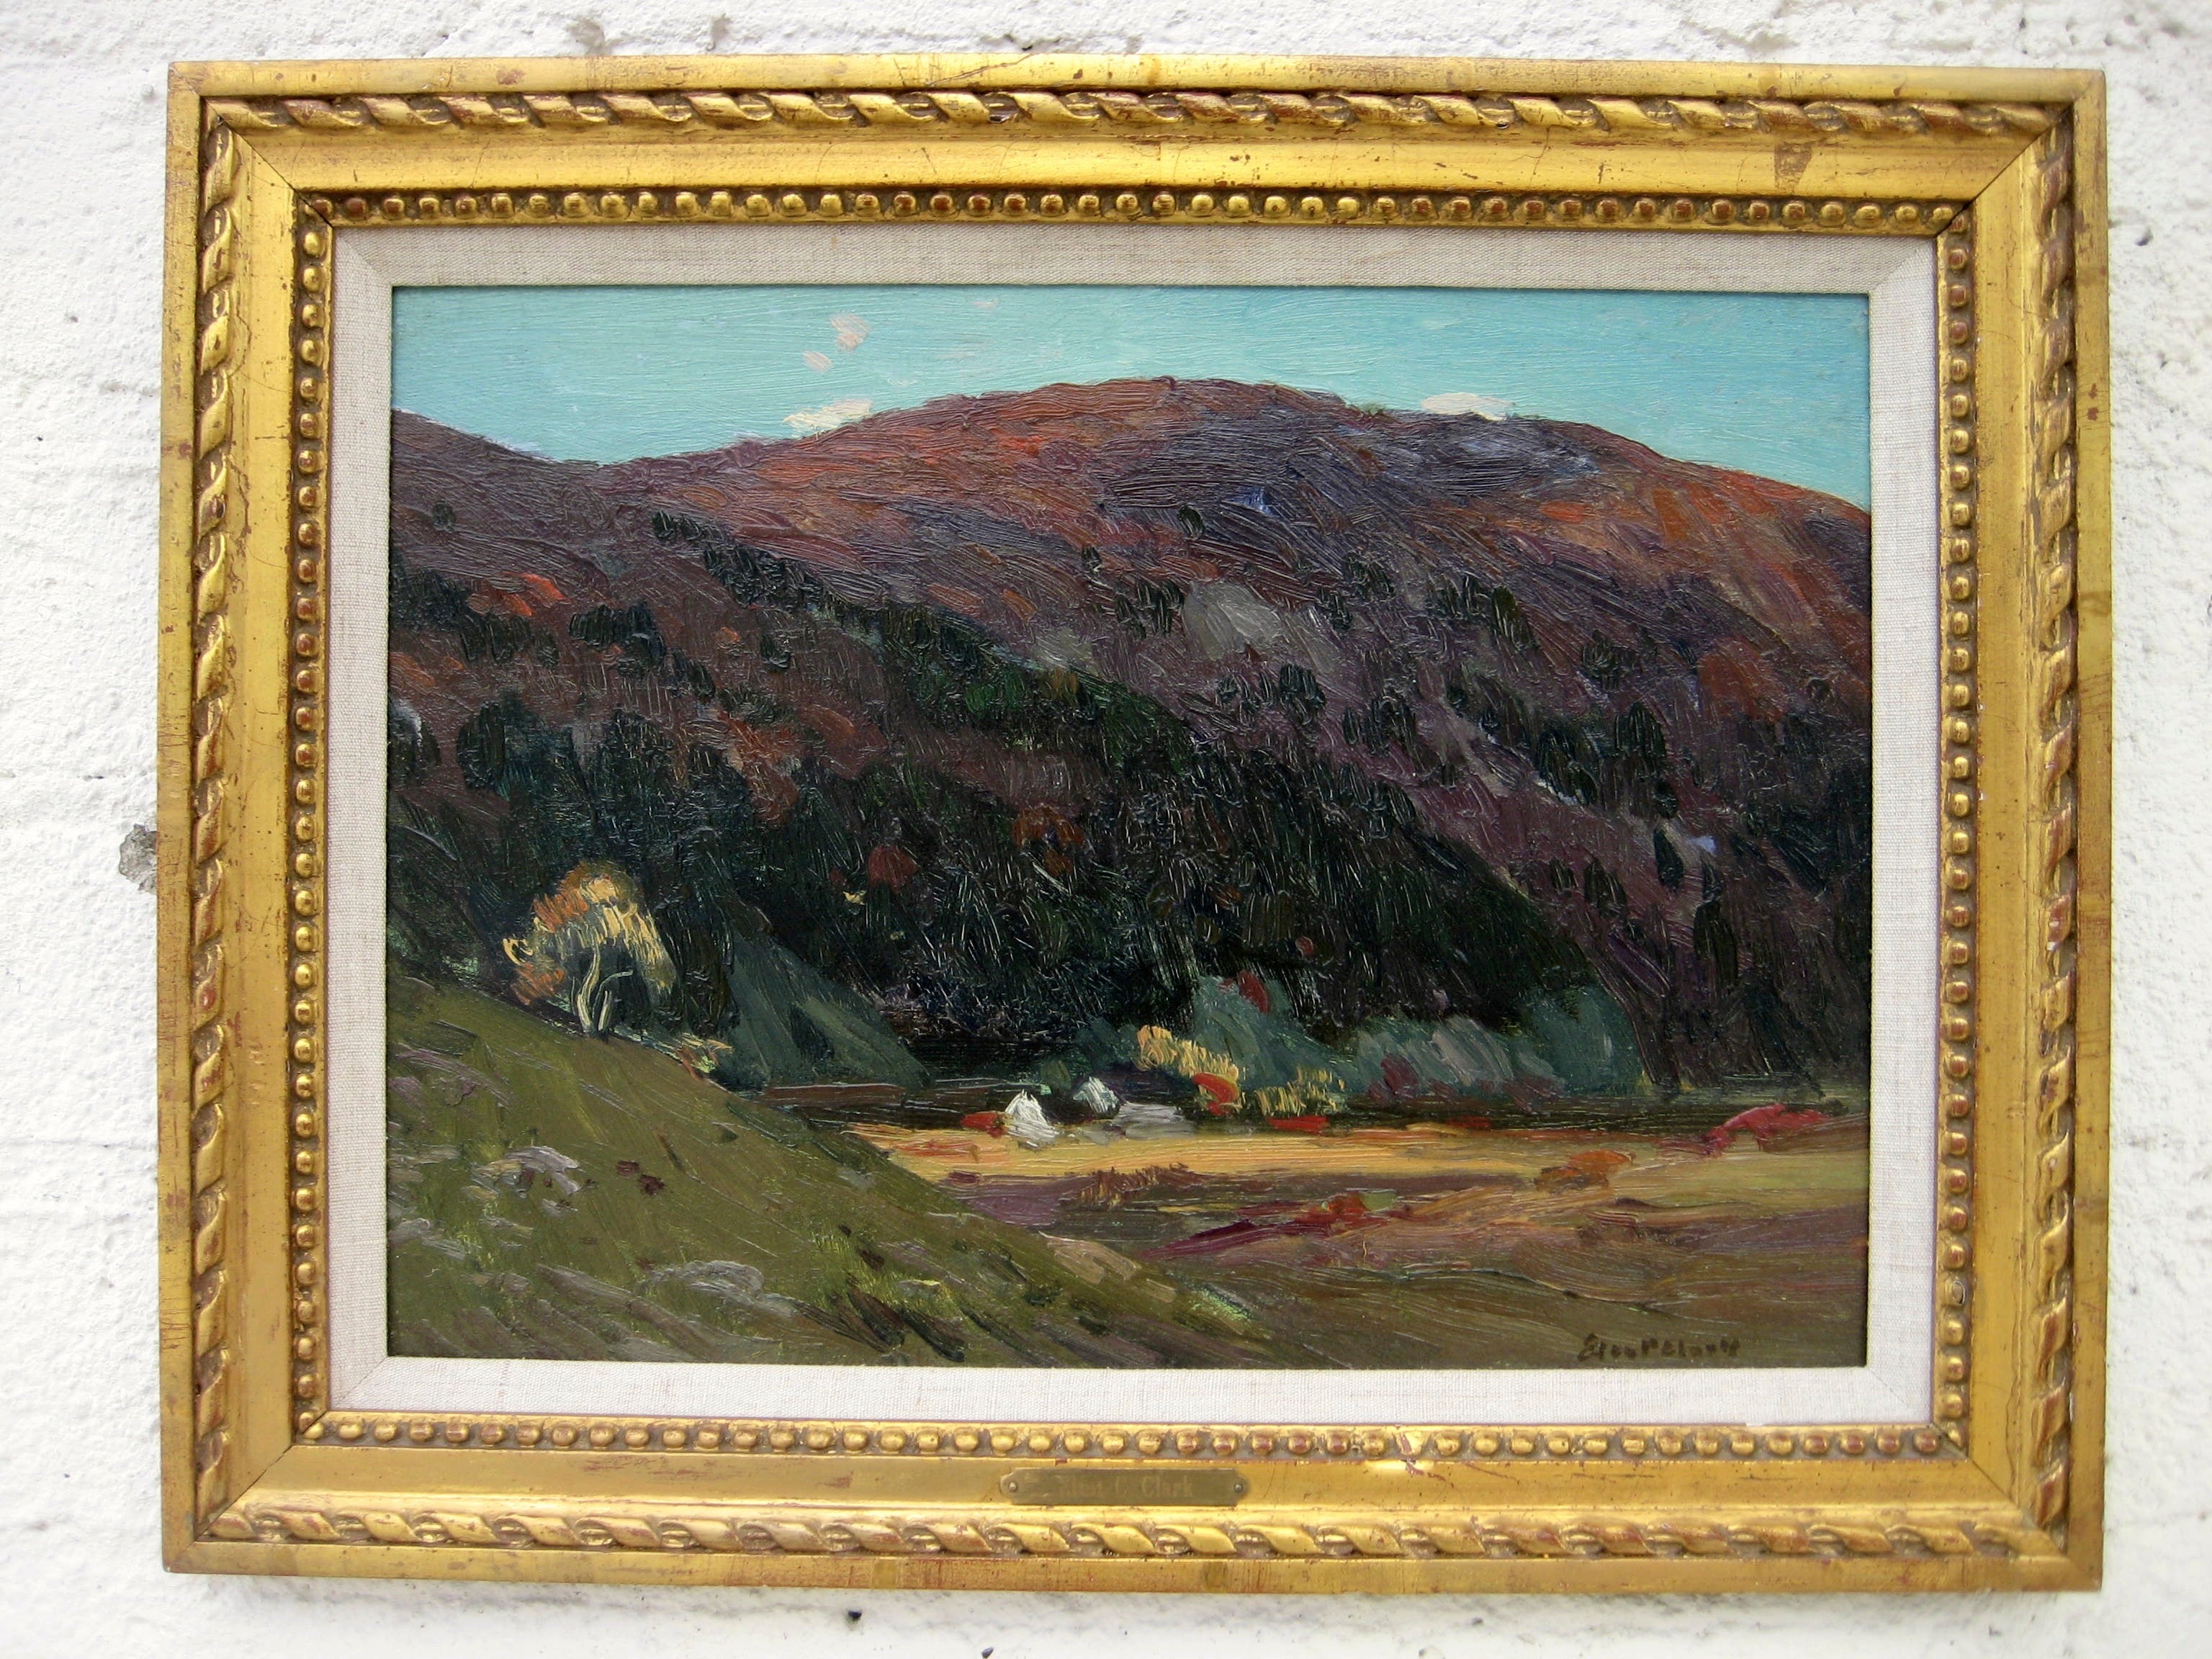 Landscape Scene of a Virginia Hollow by Eliot Candee Clark (American 1883 - 1980)